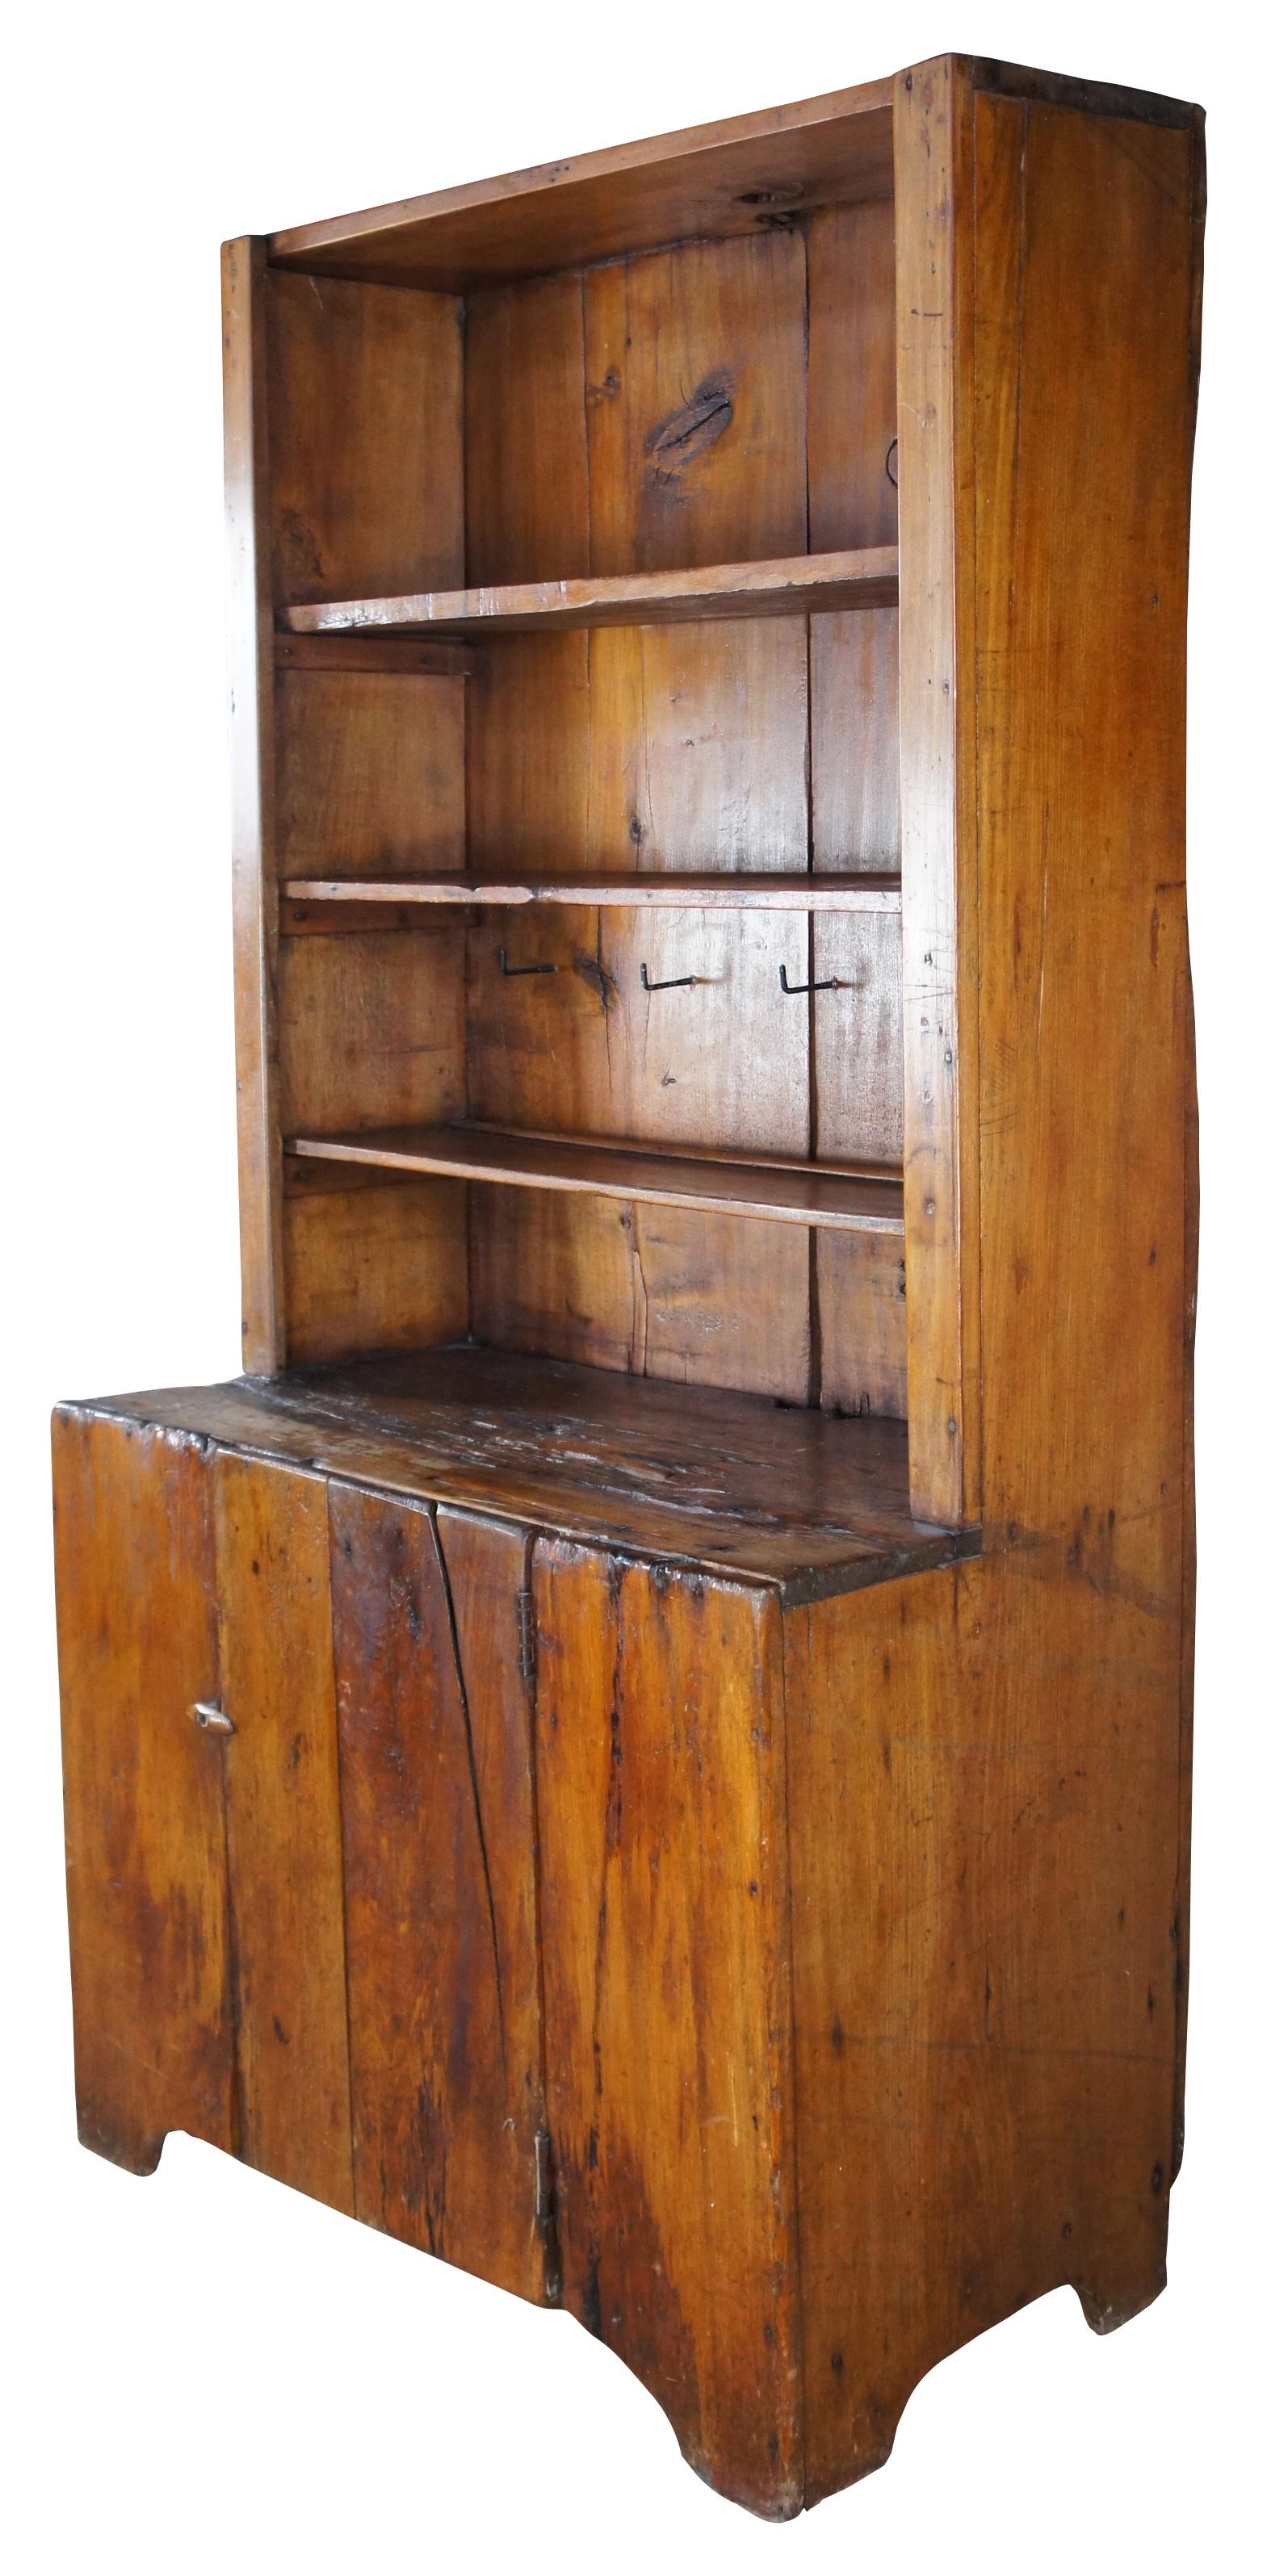 Late 18th century American pine pewter cupboard. Features a stepback from with removable shelves and iron hardware for hanging cups. Lower section opens via latch to additional storage area with shelf. This beautiful piece shows incredible signs of